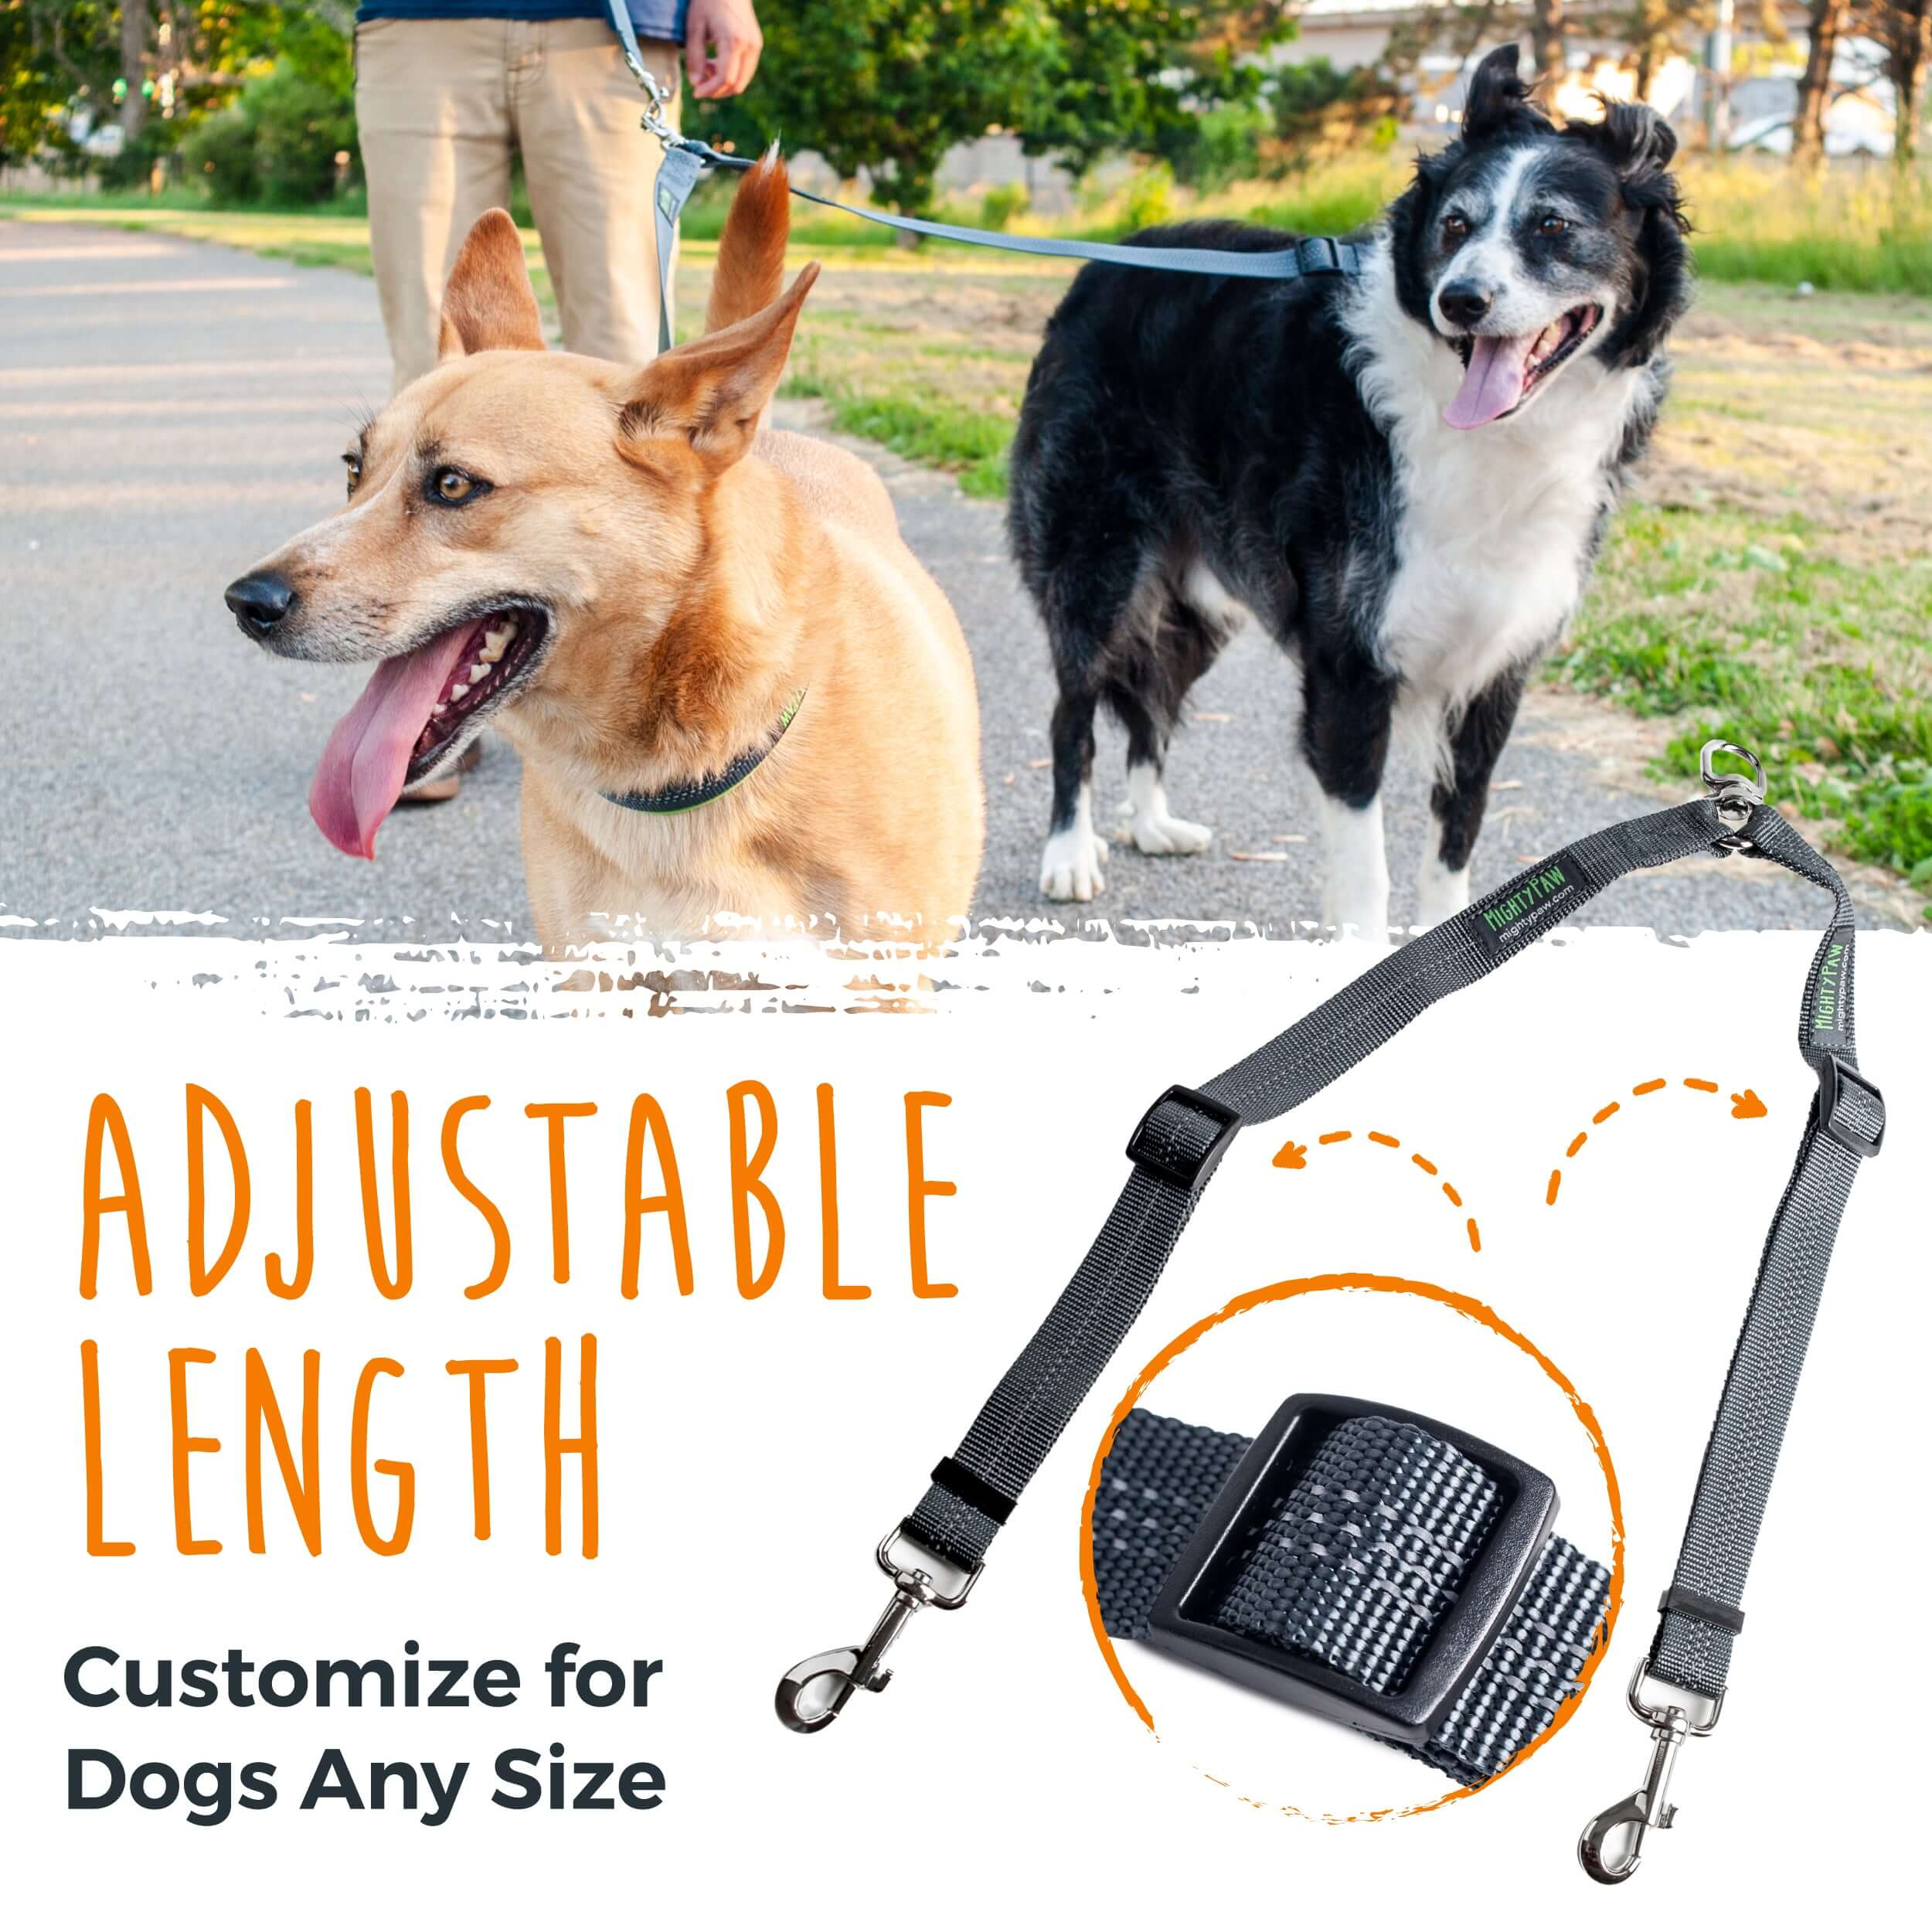 Adjustable-Length Double Dog Leash - Tangle-Free, Reflective Swivel Attachments